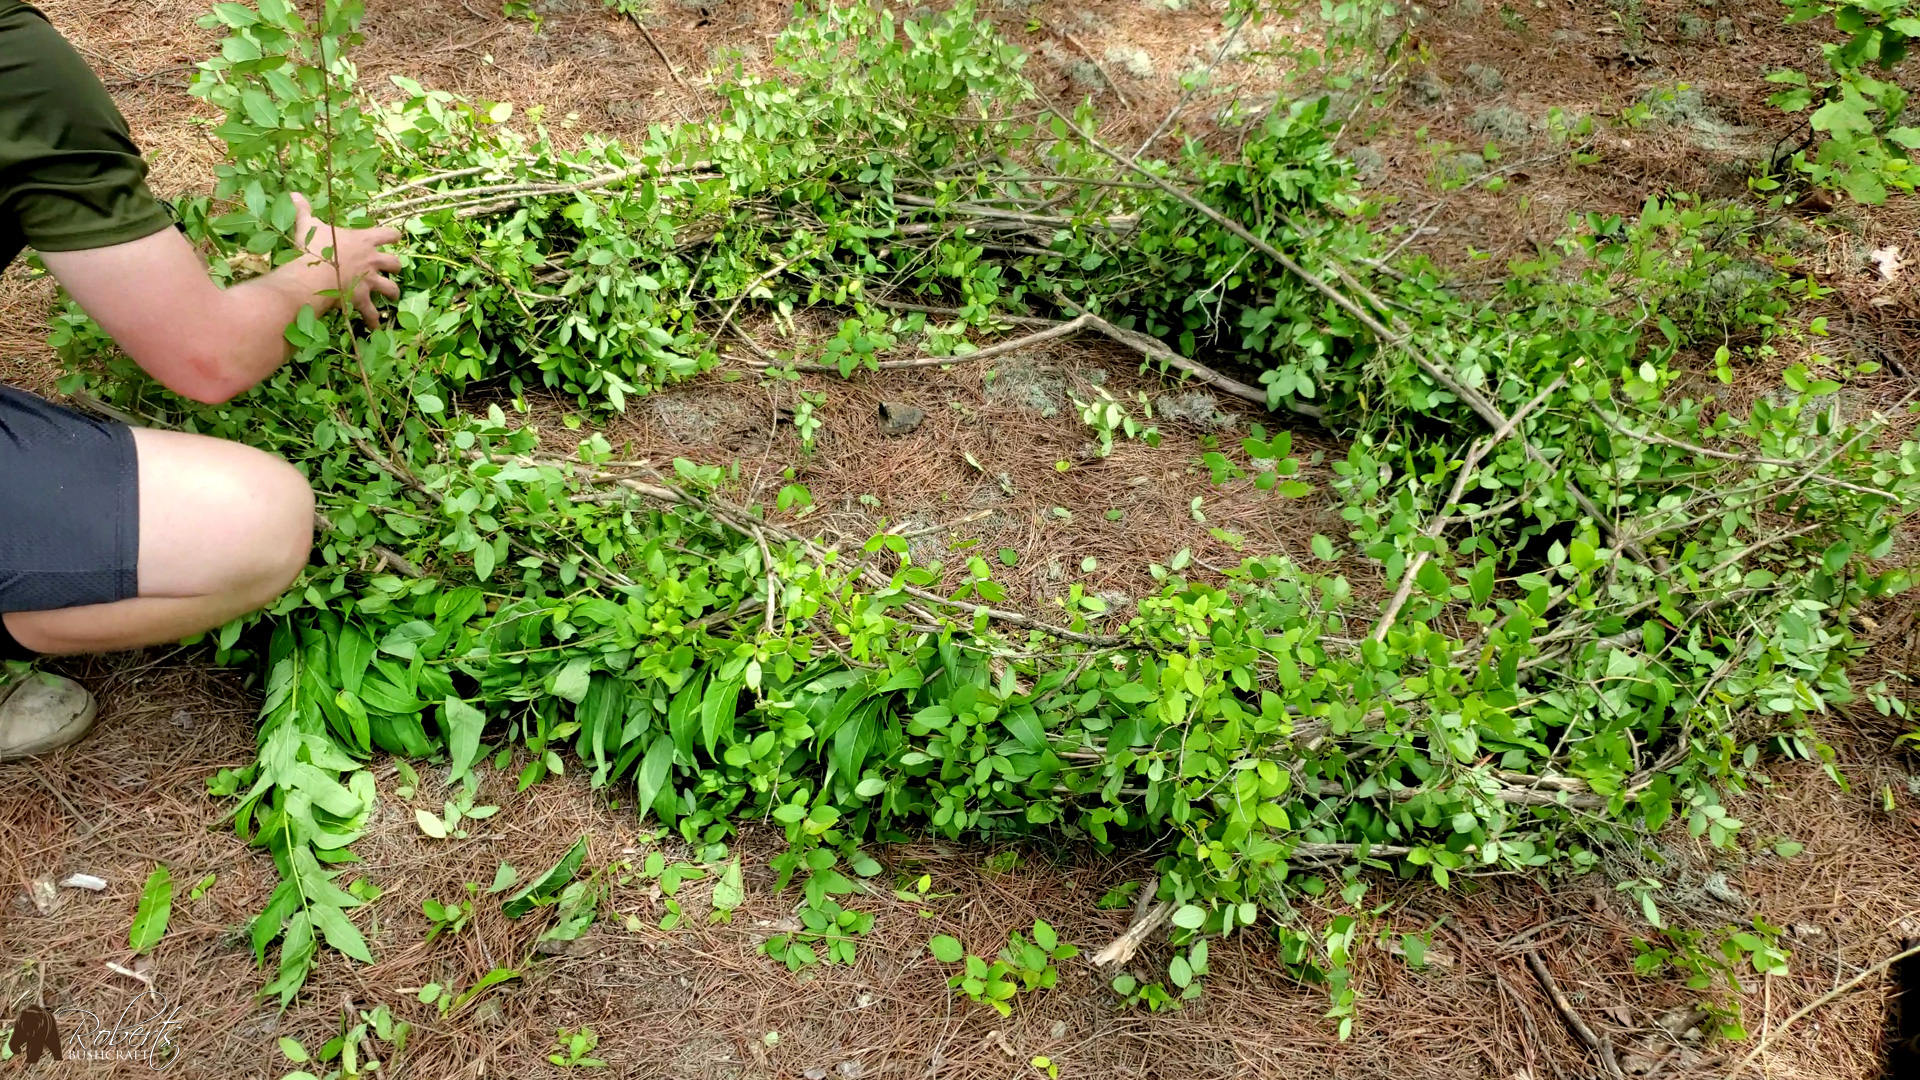 Green limbs and debris tied together to form the frame of the raft